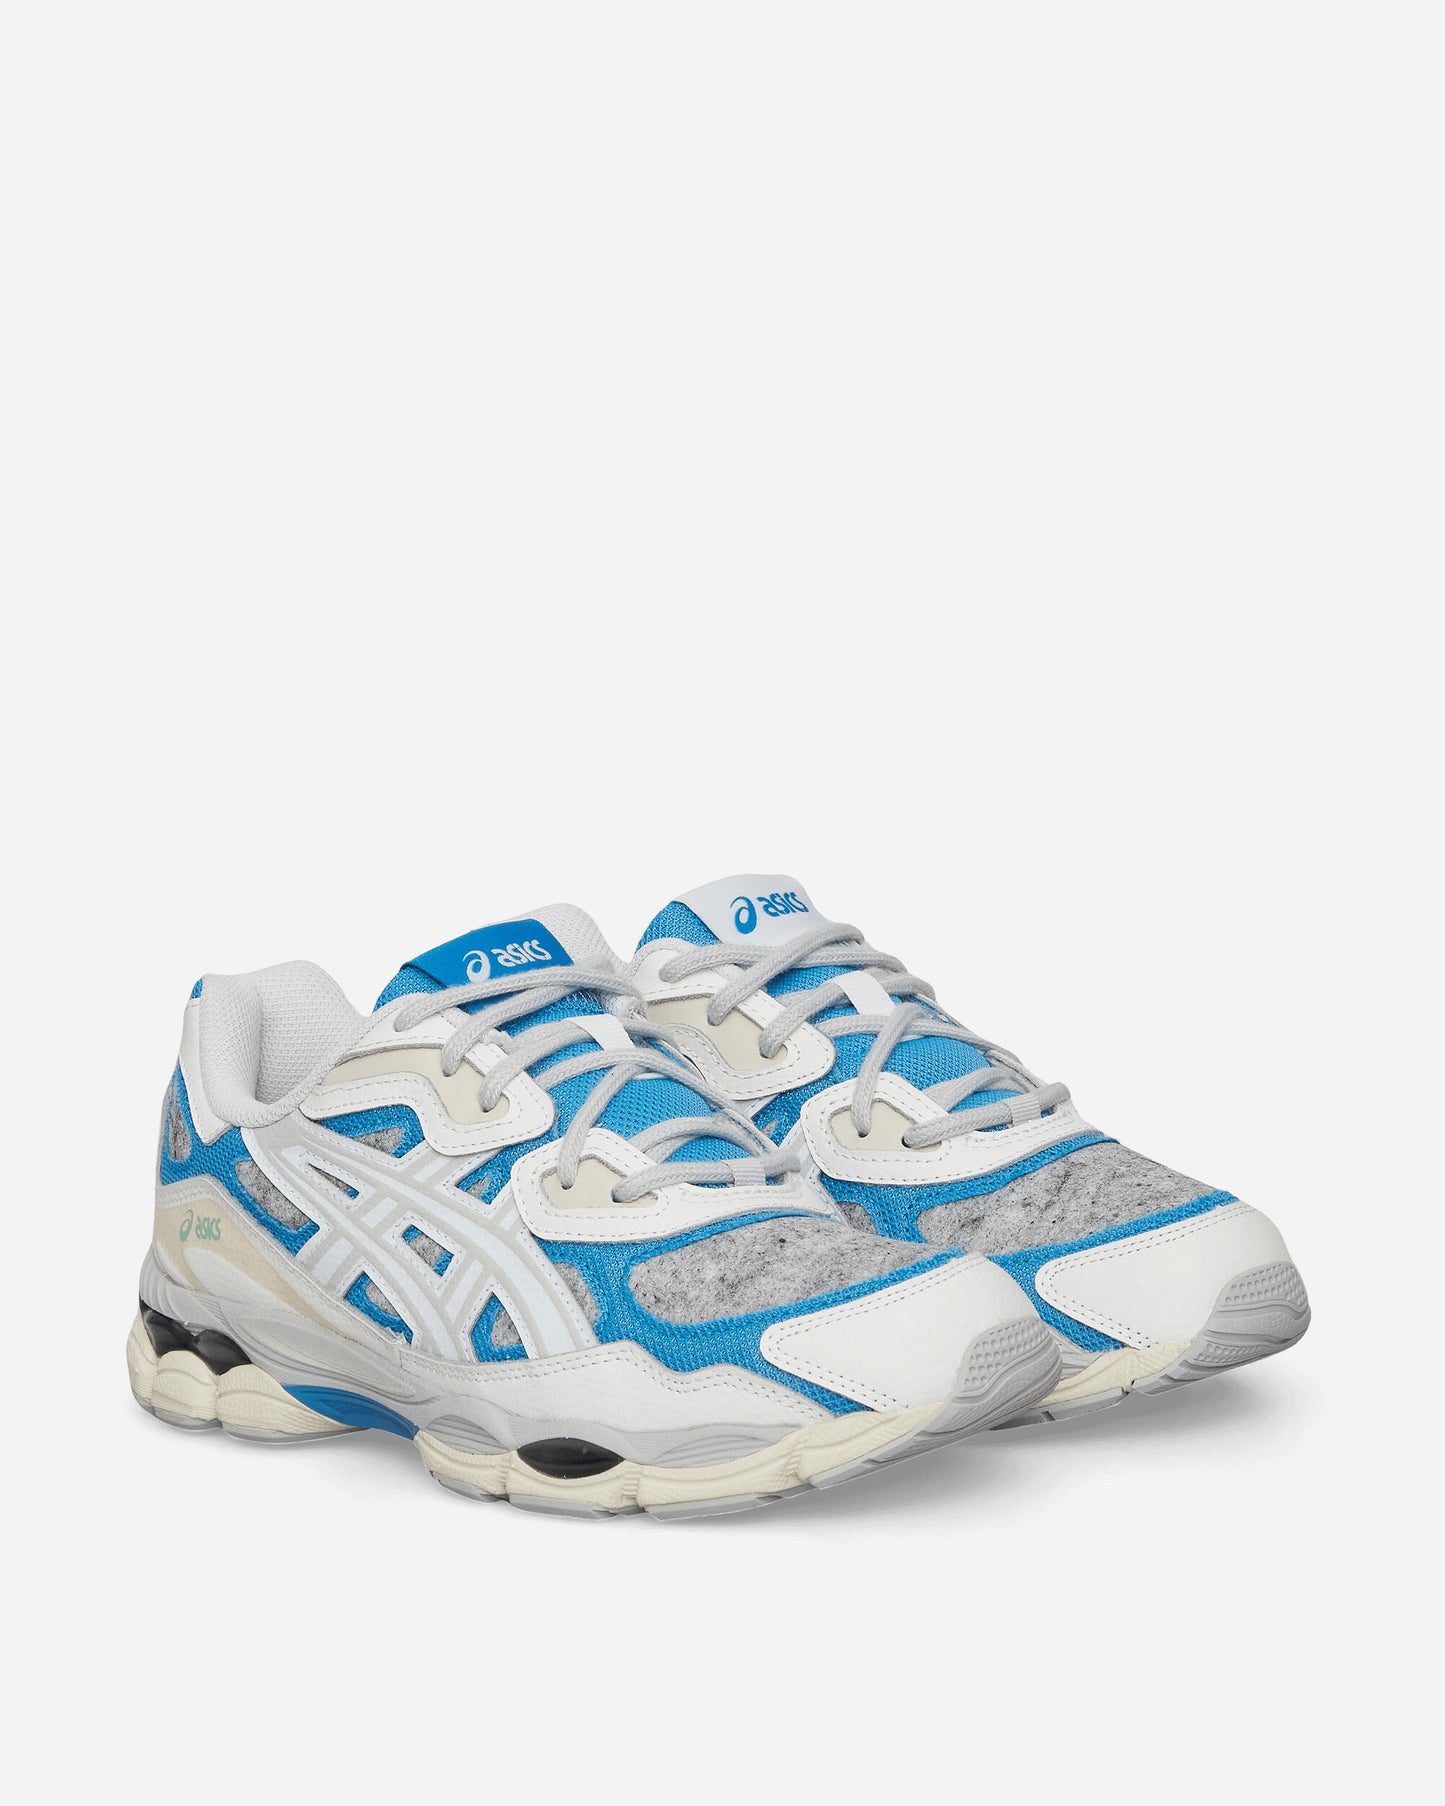 Asics Gel-Nyc White/Dolphin Blue Sneakers Low 1203A281-100